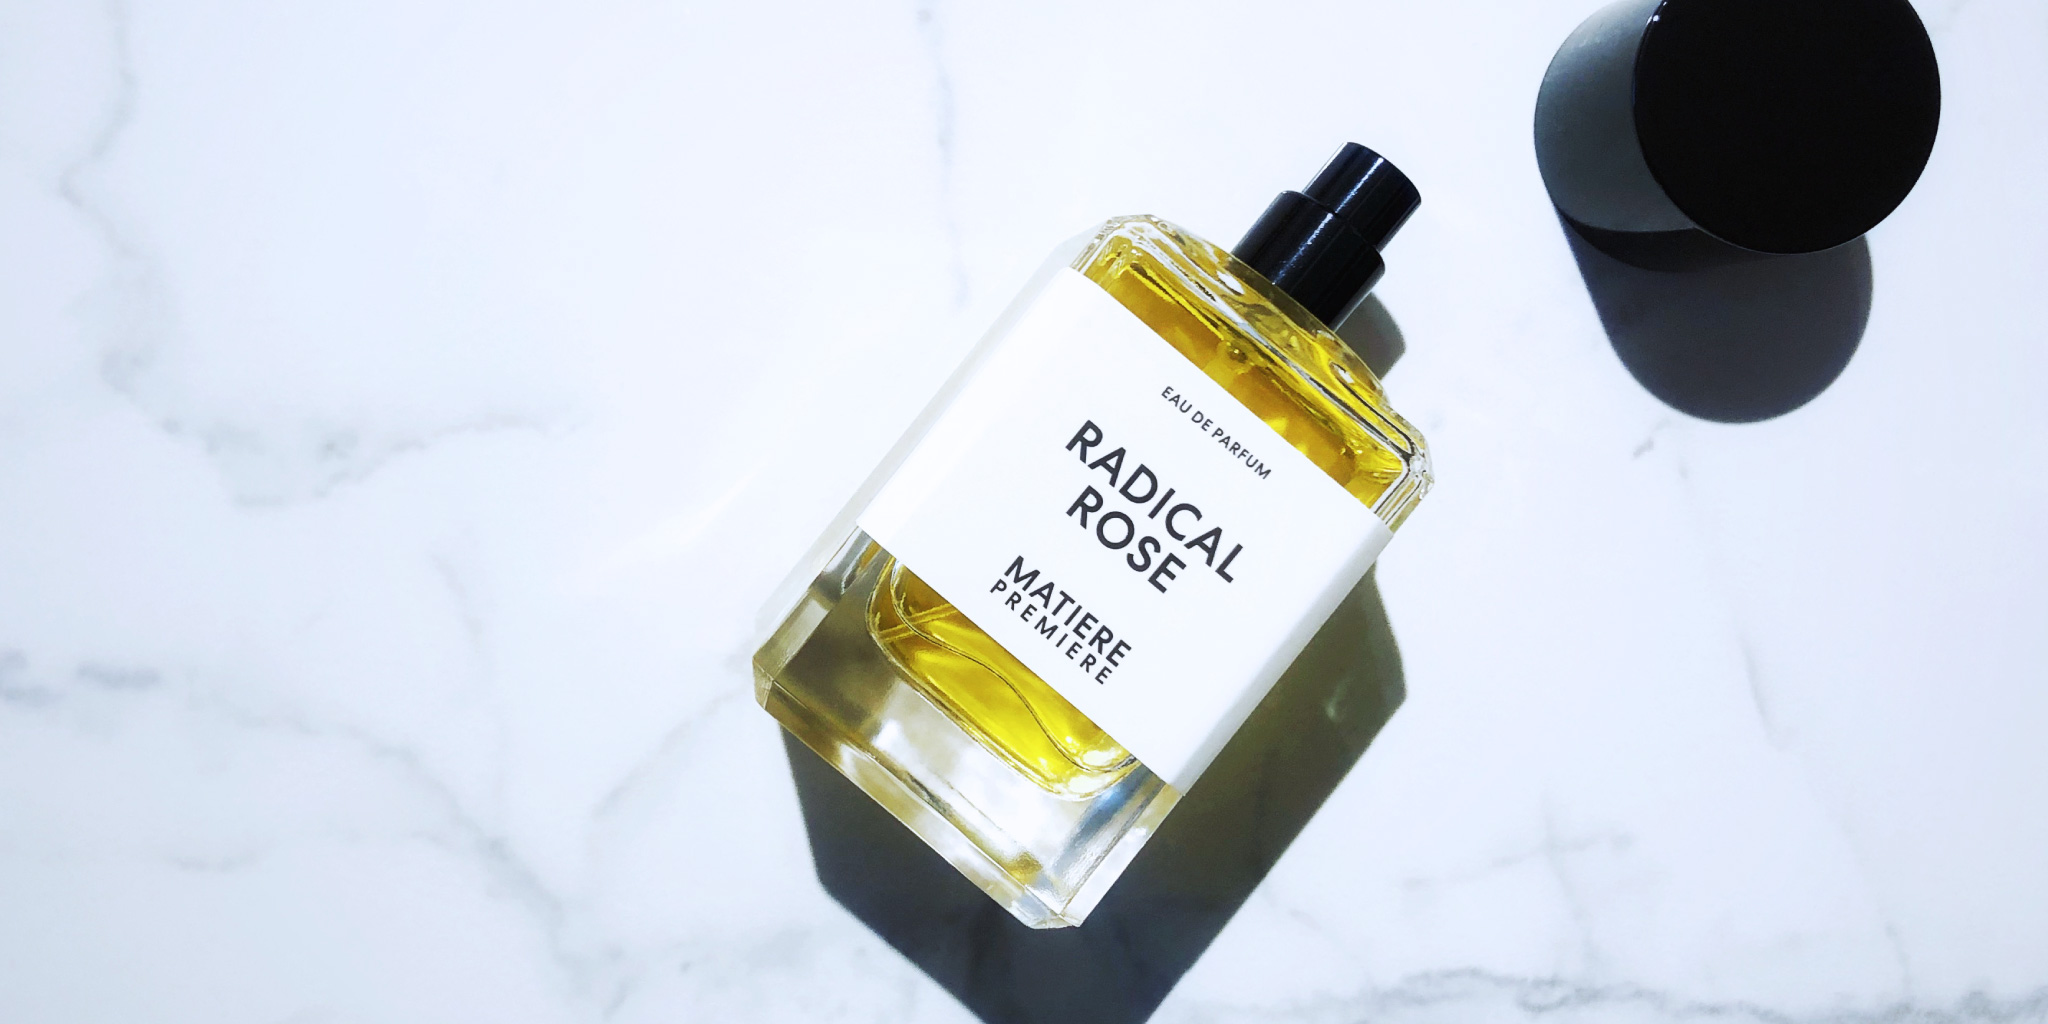 Review: Matière Première —Radical Rose – Waxy Beauty